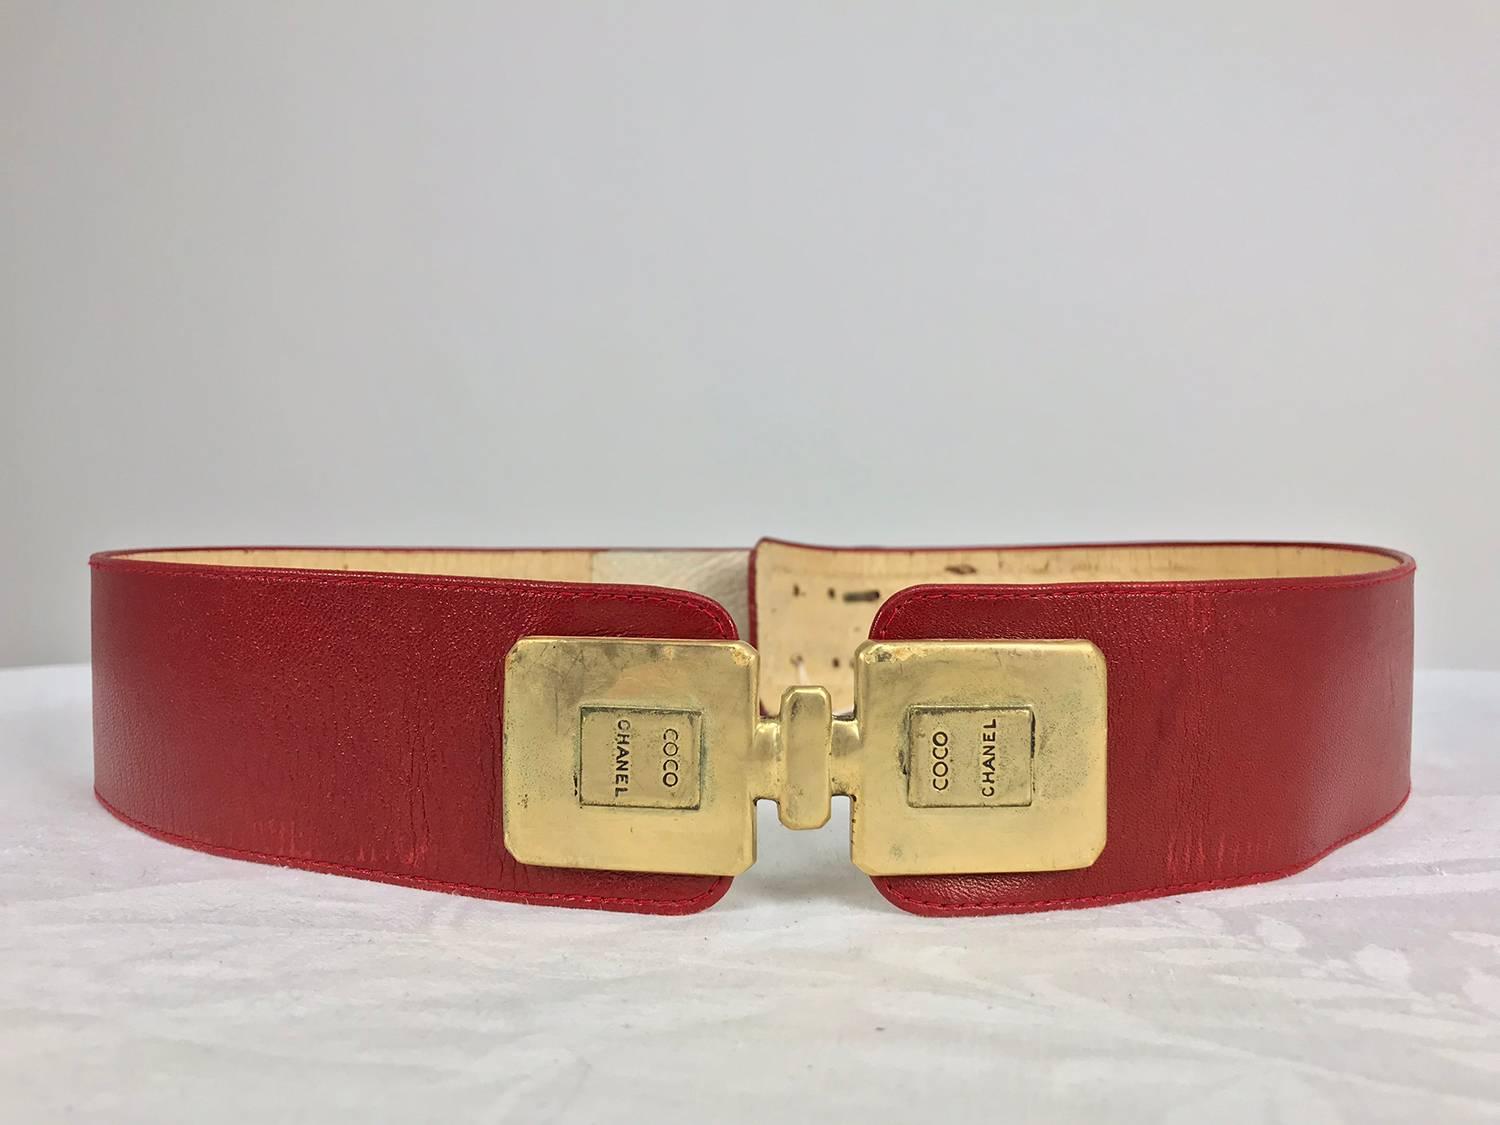 Women's Chanel Coco gold bottles with red leather belt vintage 1980s